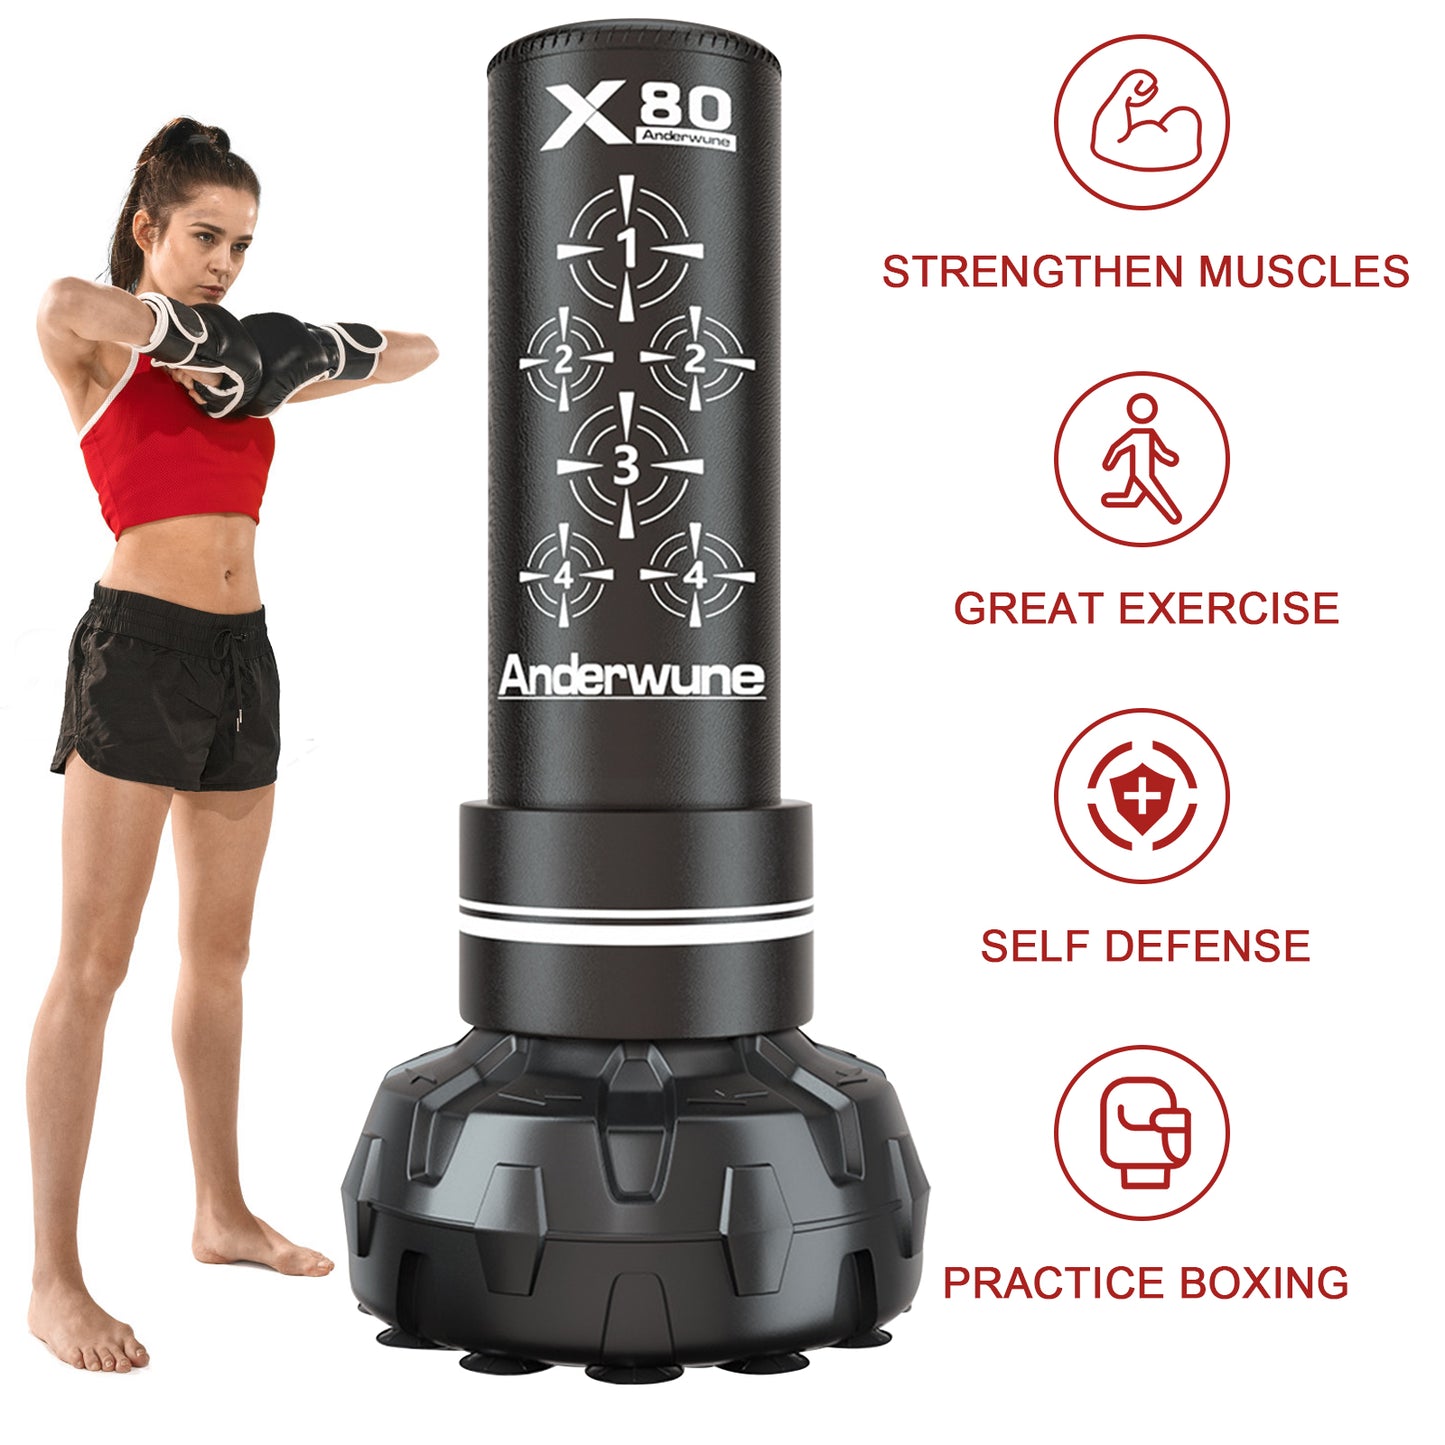 Freestanding Punching Bags for Adults -Training MMA Muay Thai Fitness